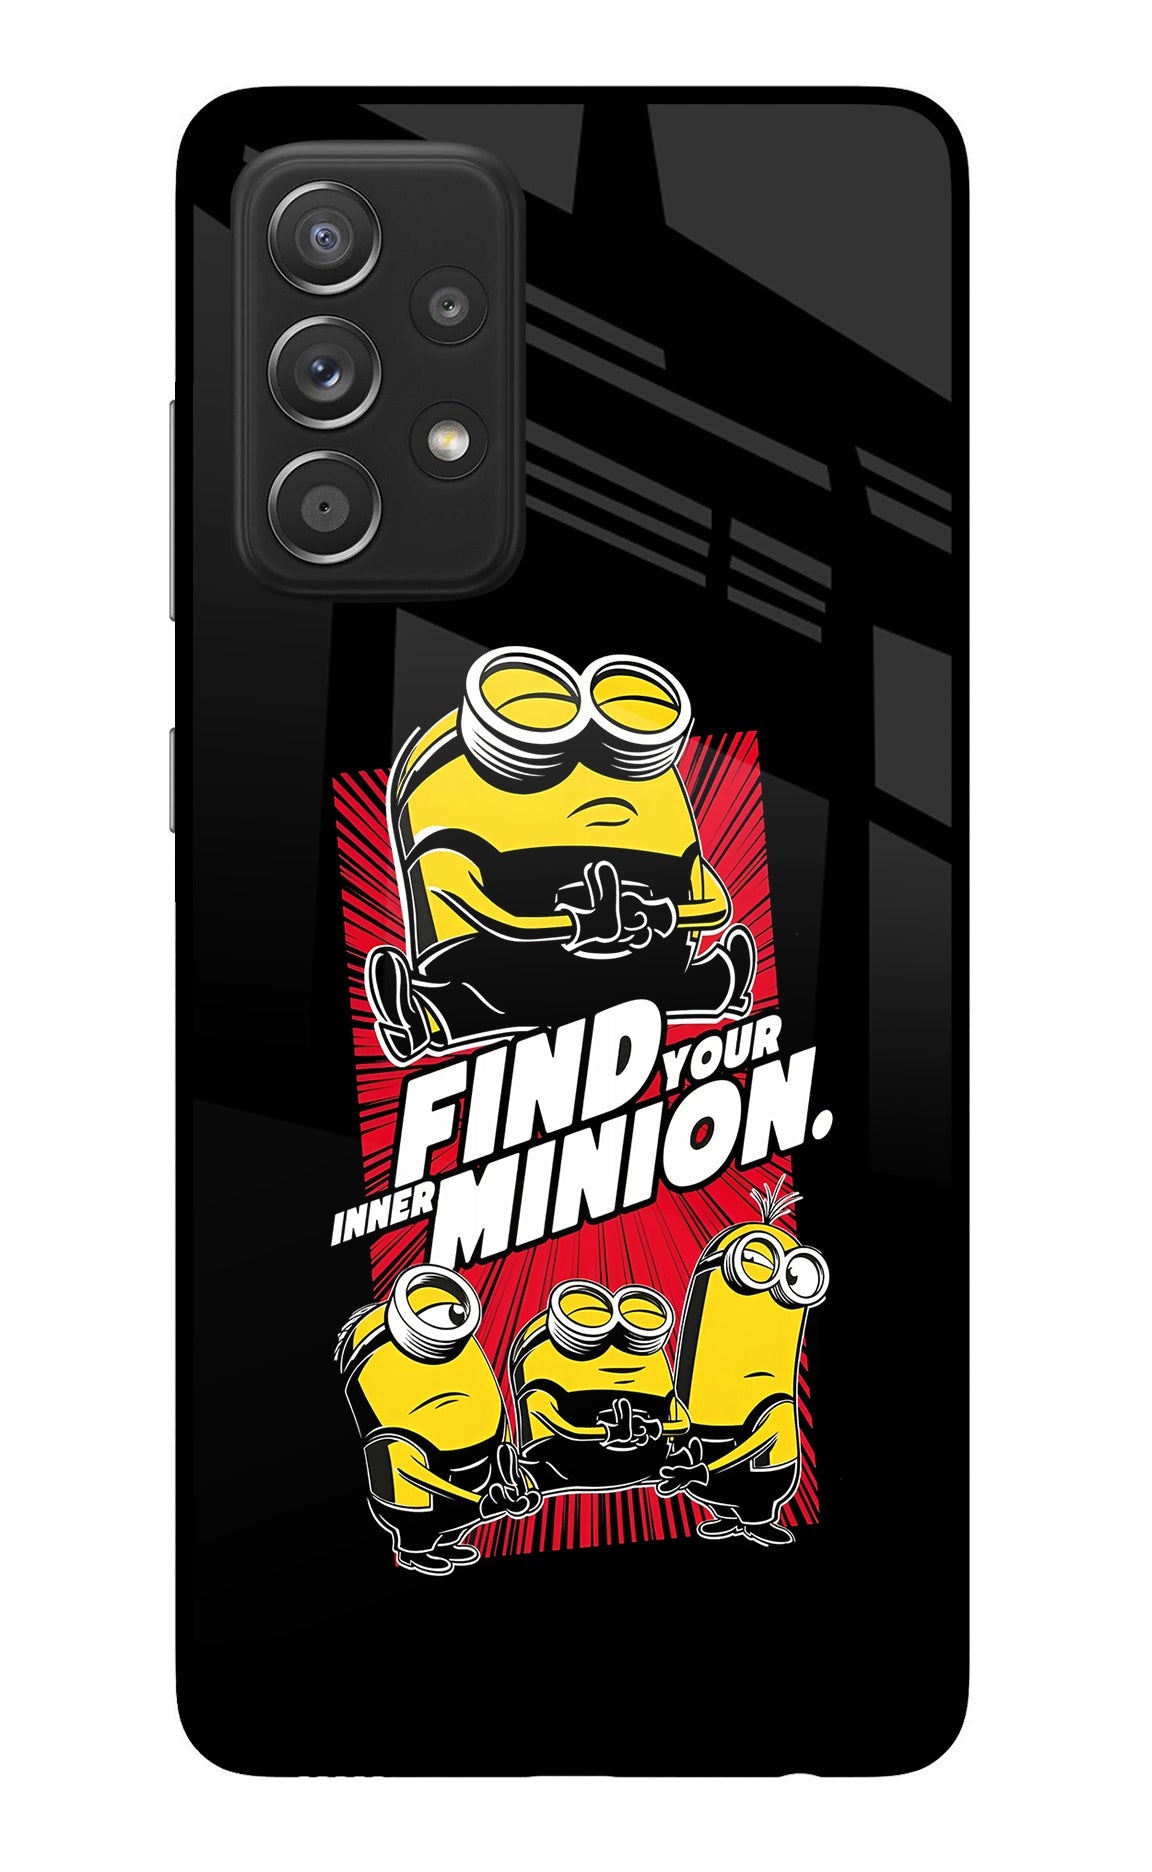 Find your inner Minion Samsung A52/A52s 5G Back Cover